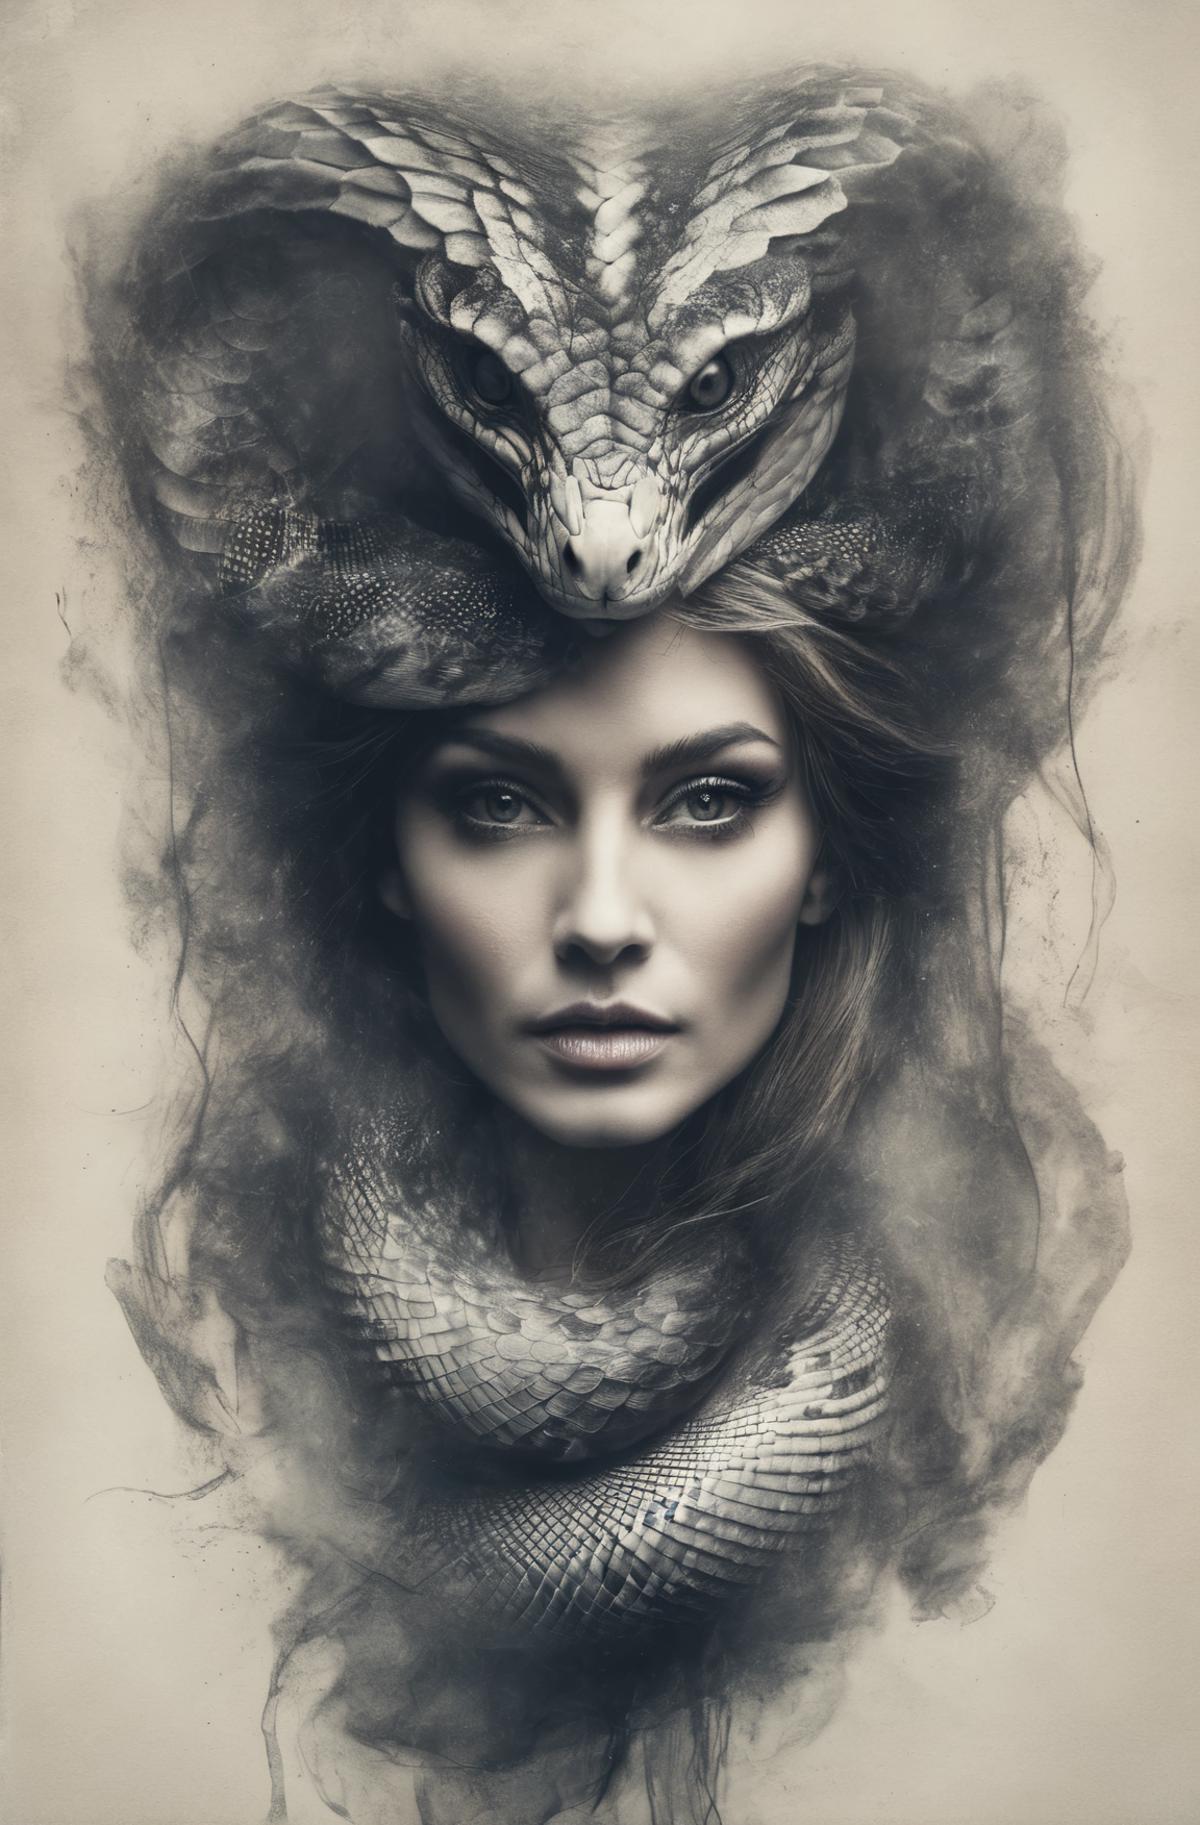 Woman with a snake on her head, wearing a snake as a hat, and surrounded by a snake.